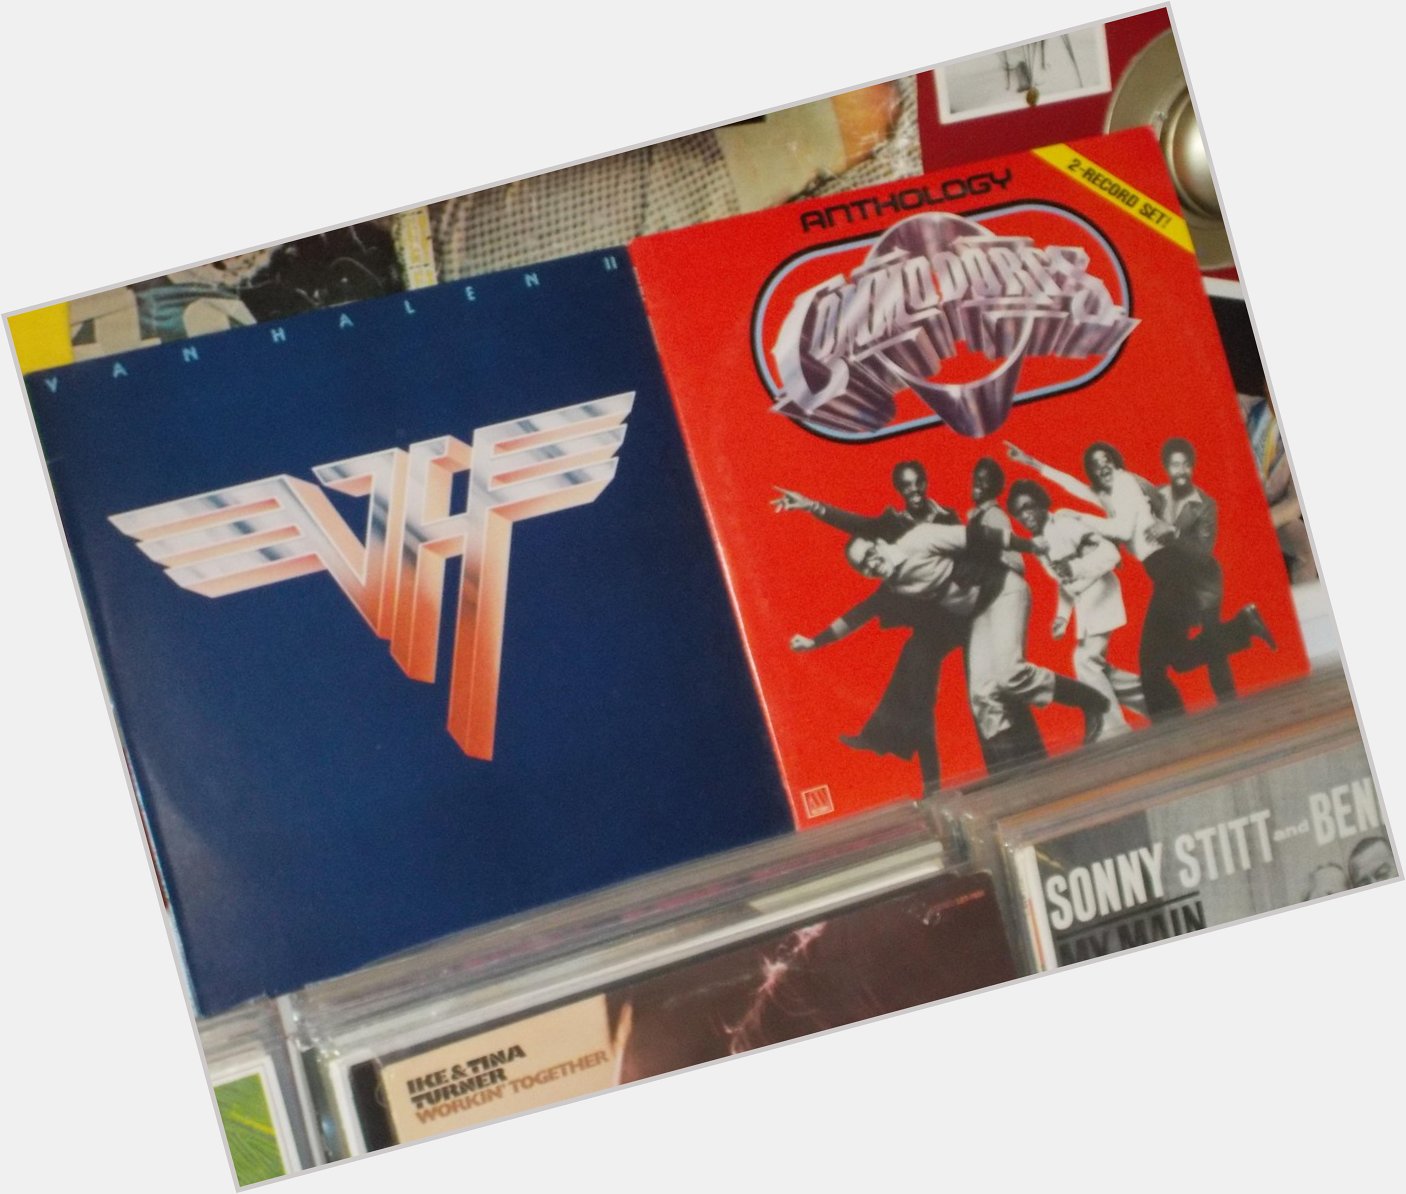 Happy Birthday to Michael Anthony of Van Halen and Lionel Ritchie of the Commodores 